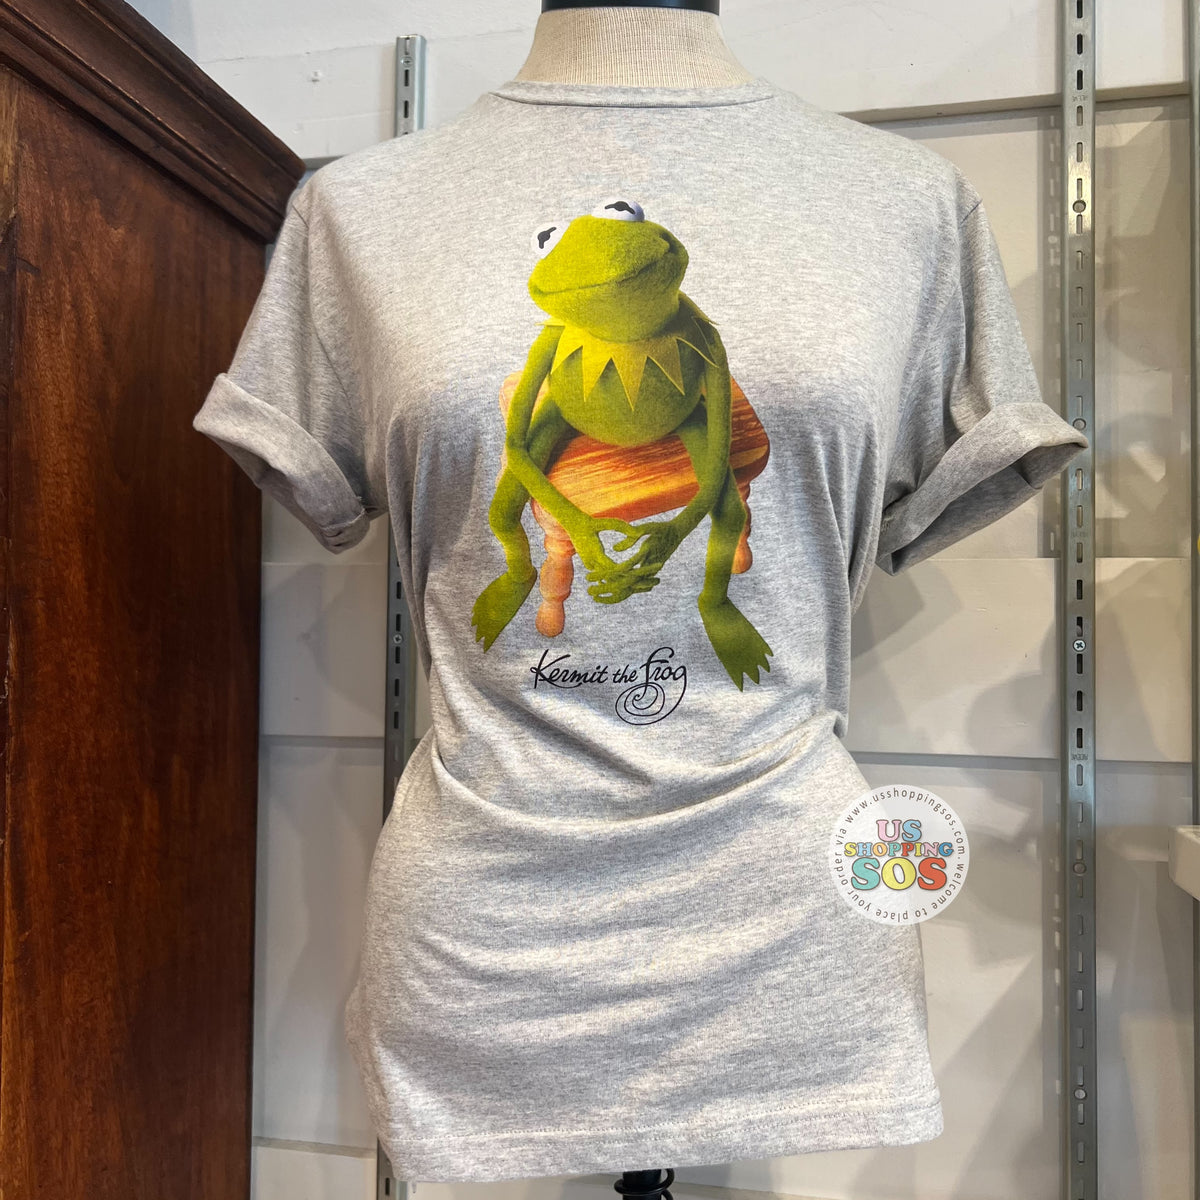 - Heather T-shirt Frog Muppets DLR Grey The USShoppingSOS the (Adult) Kermit Graphic —